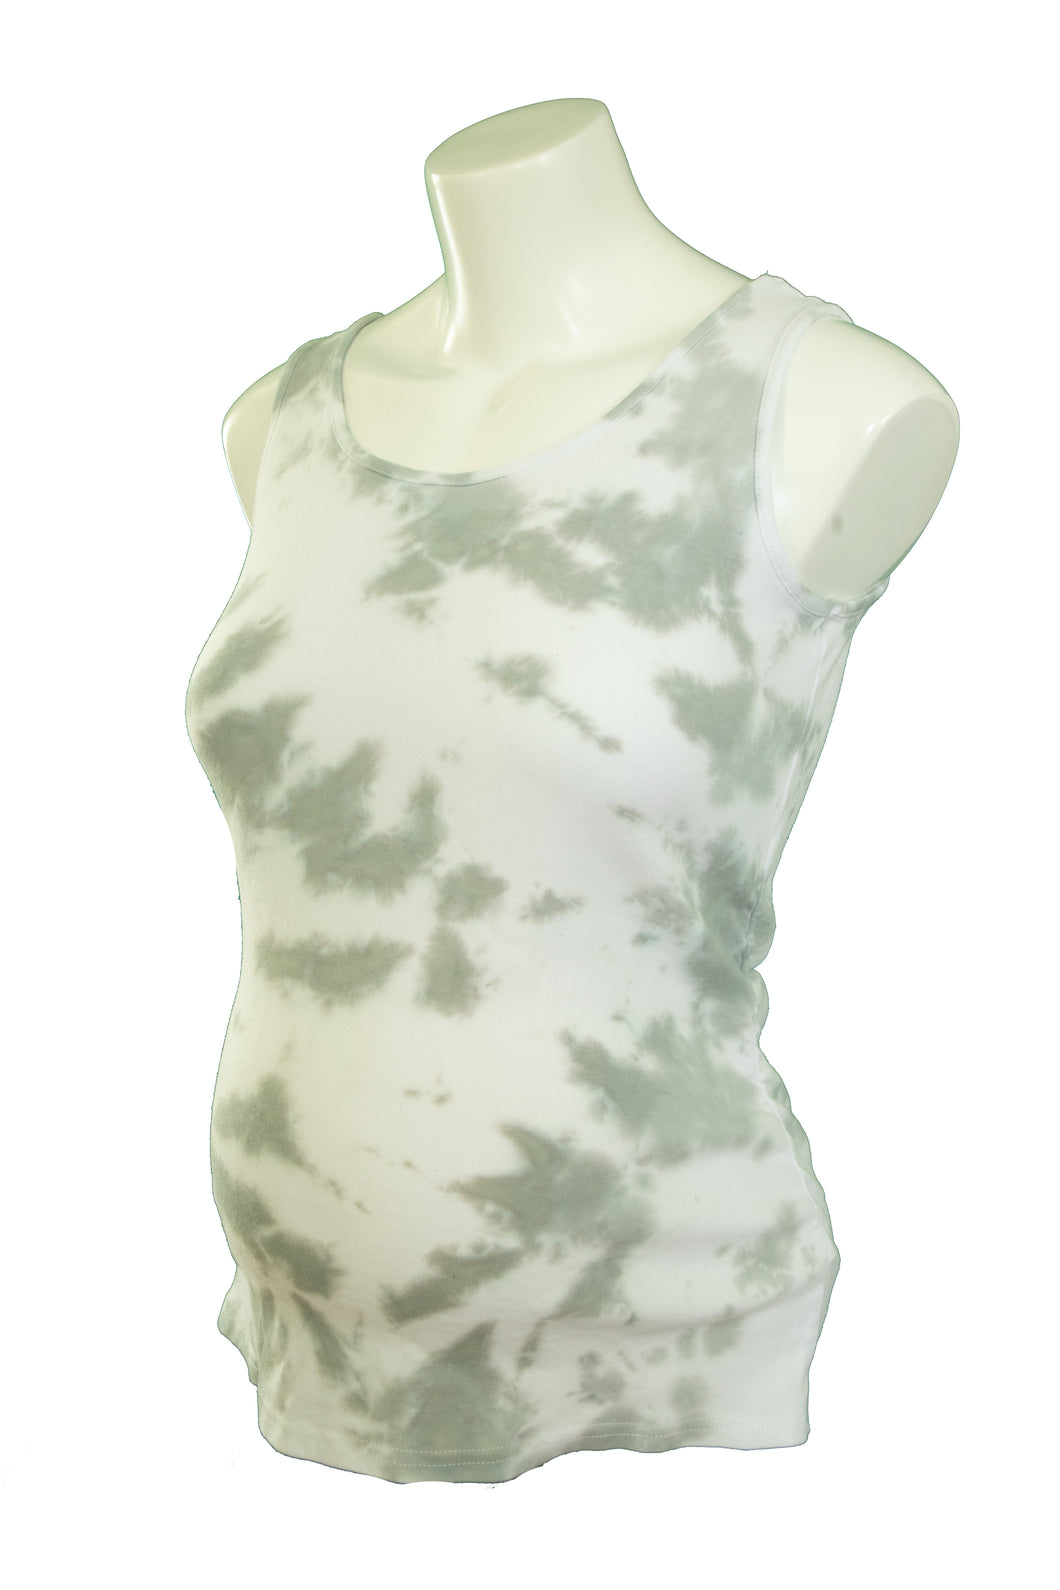  Tie Dye maternity tank top. Summer Maternity clothes 7tee Dyes pregnant pregnancy